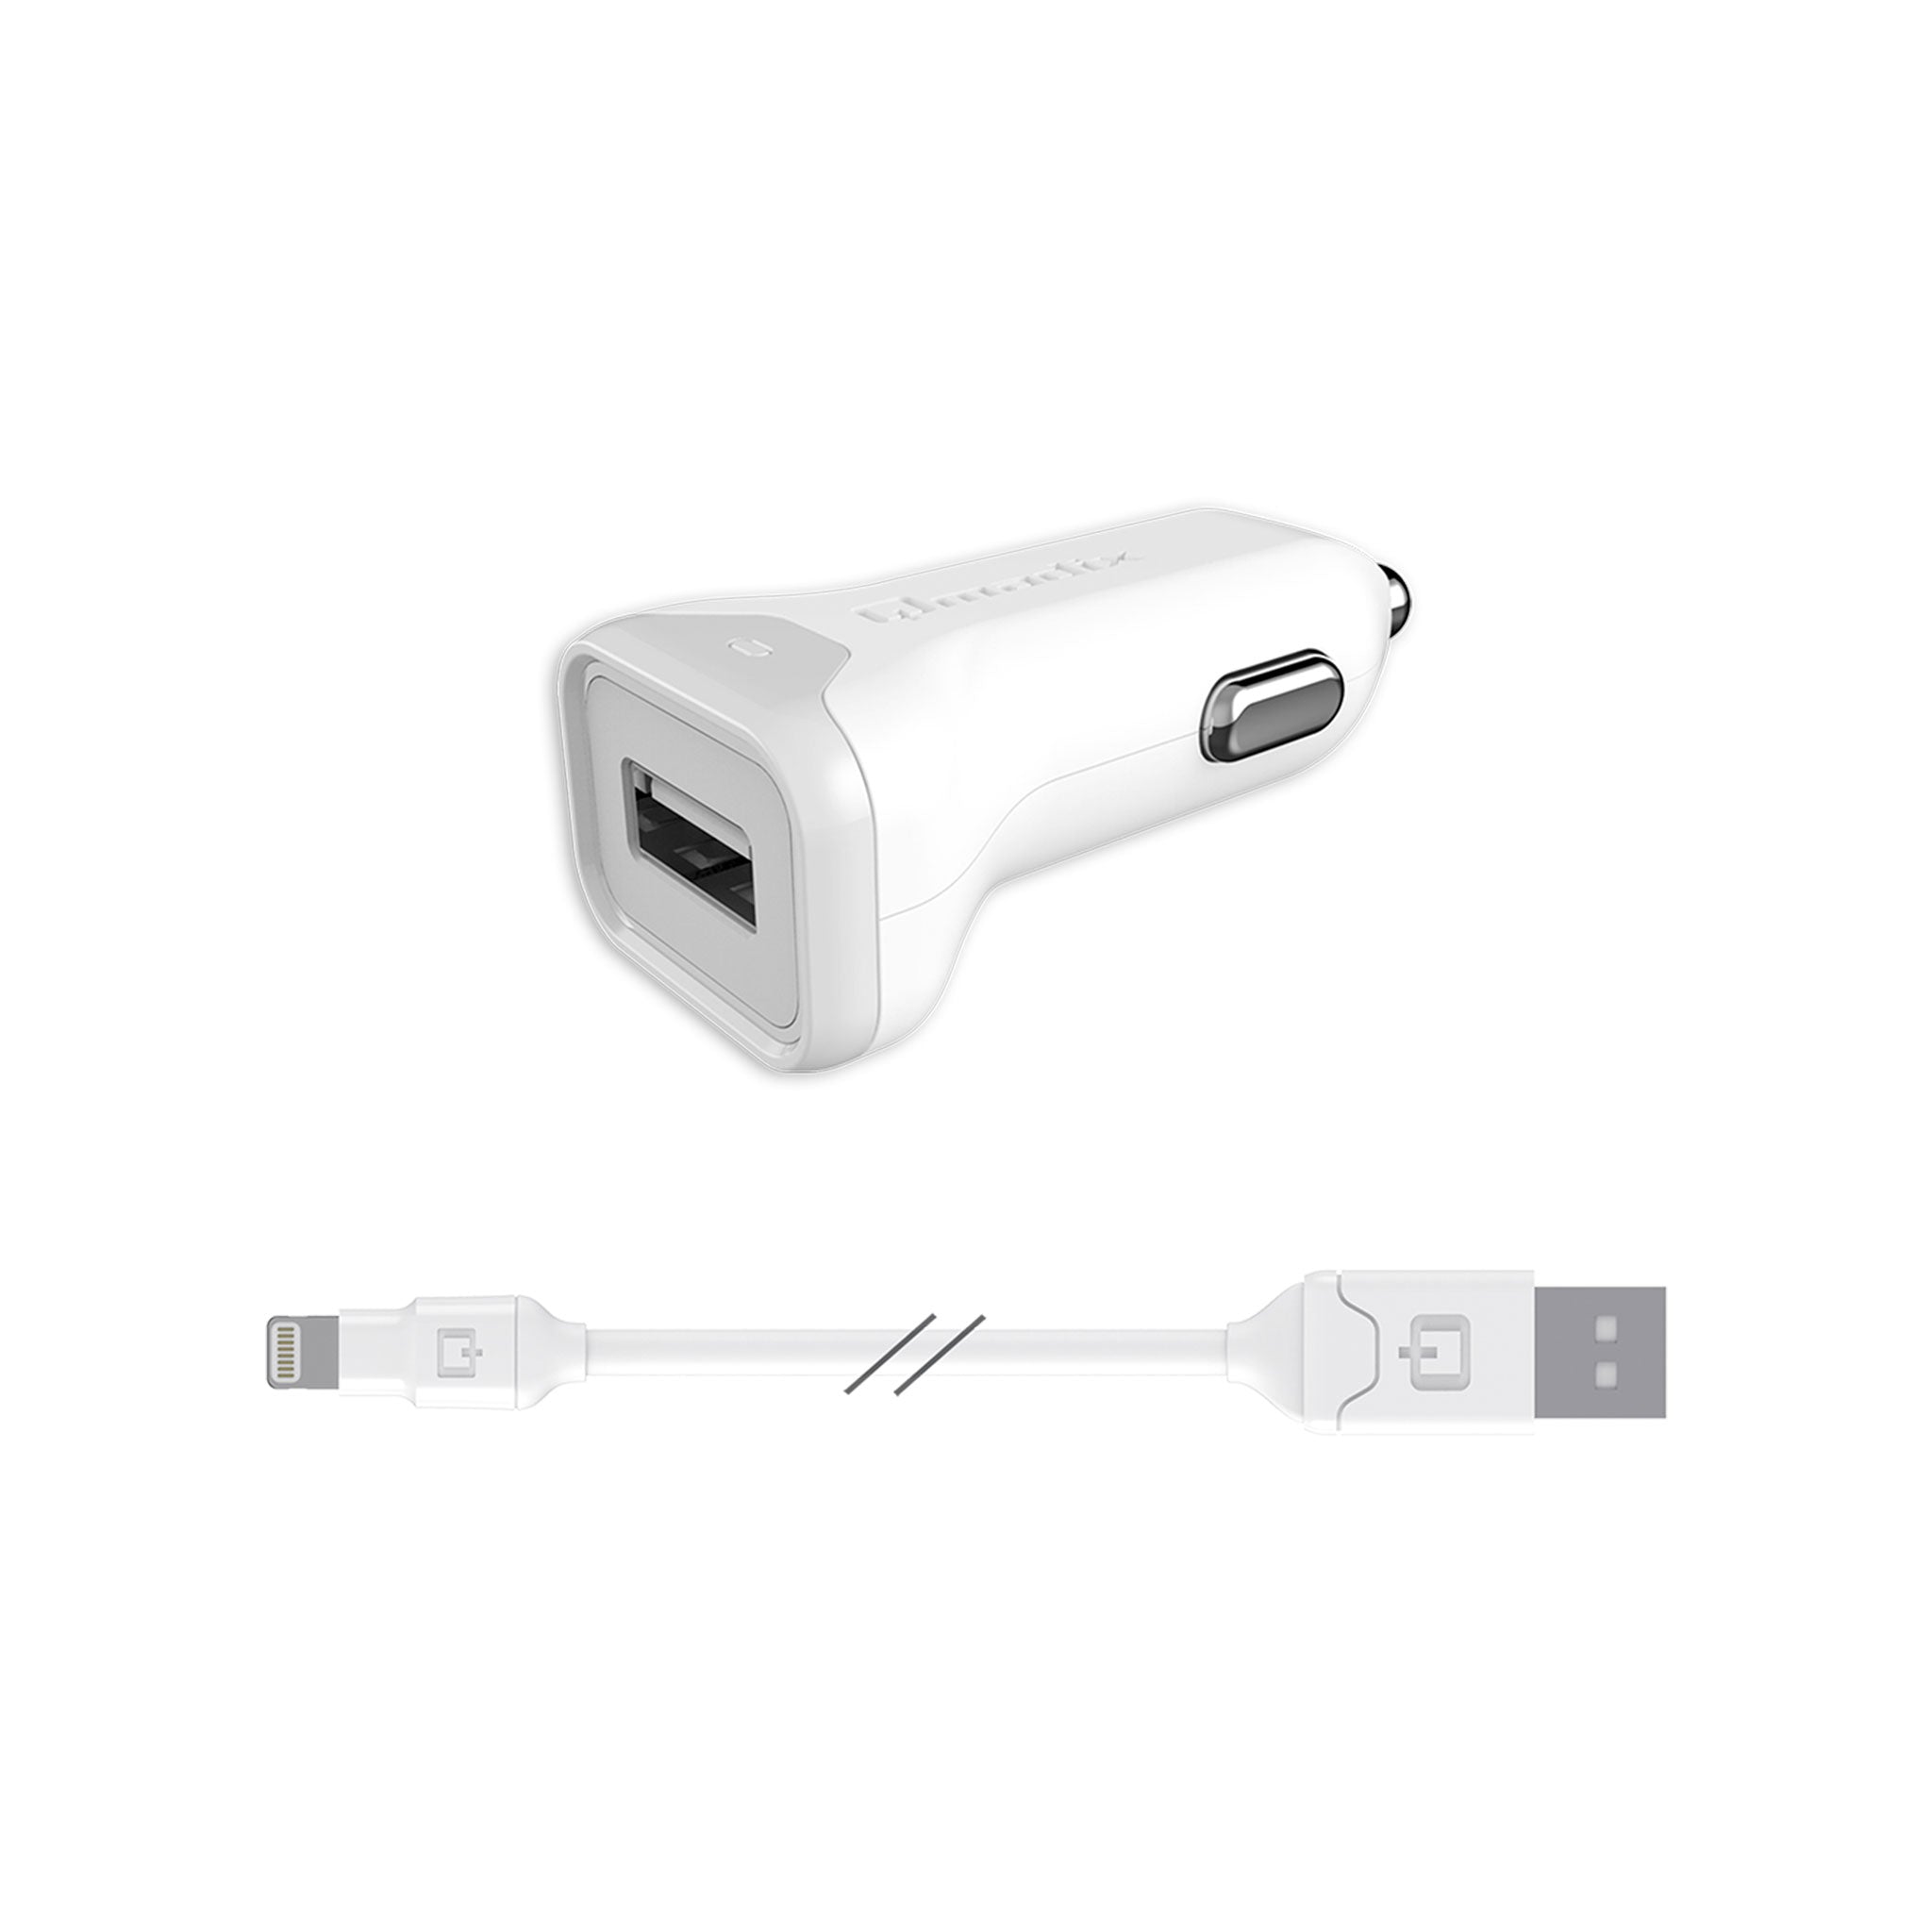 Qmadix - Car Charger 2.4a And Apple Lightning Cable 4ft - White